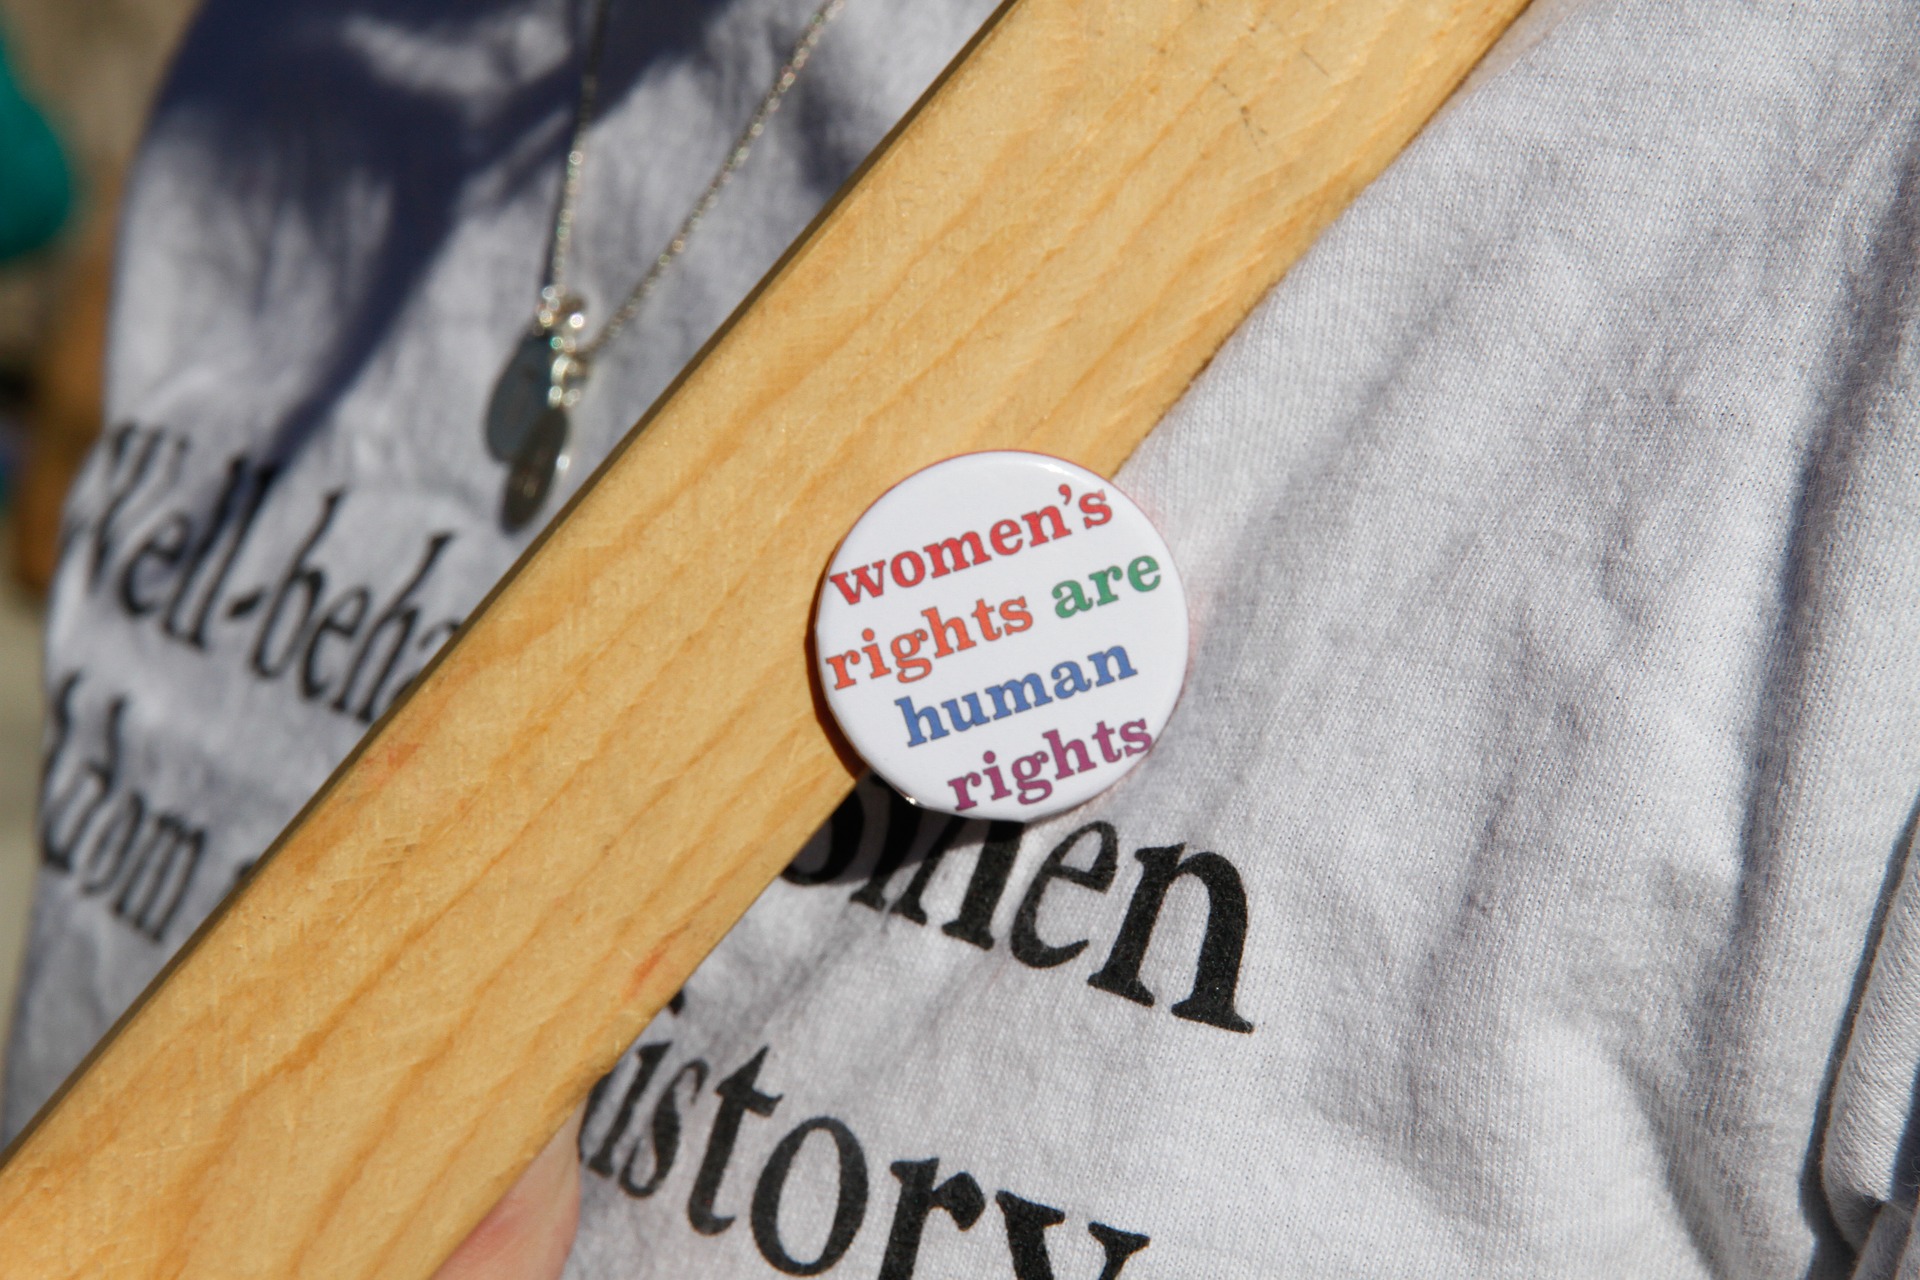 Women's rights are human rights lapel pin.